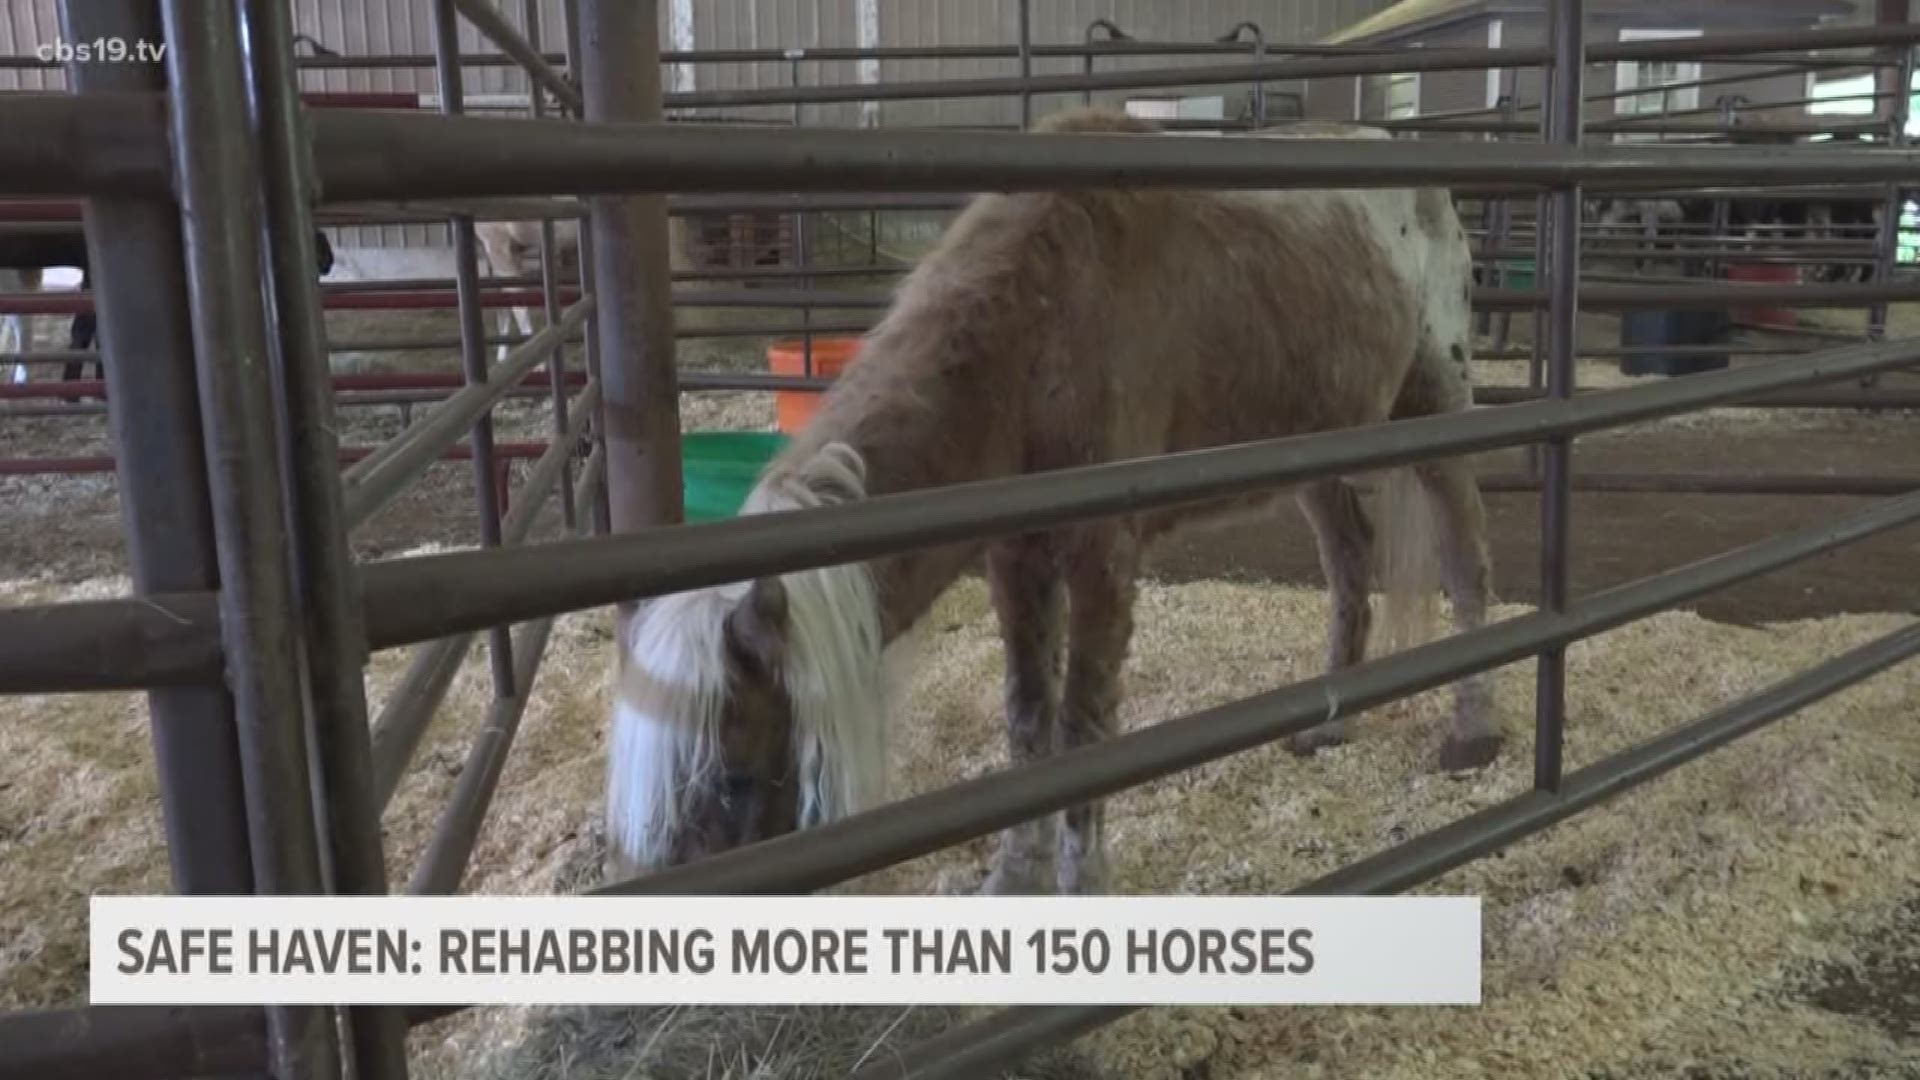 CBS19 gets a first look at the 159 horses rescued from extremely poor living conditions on a Camp County property.